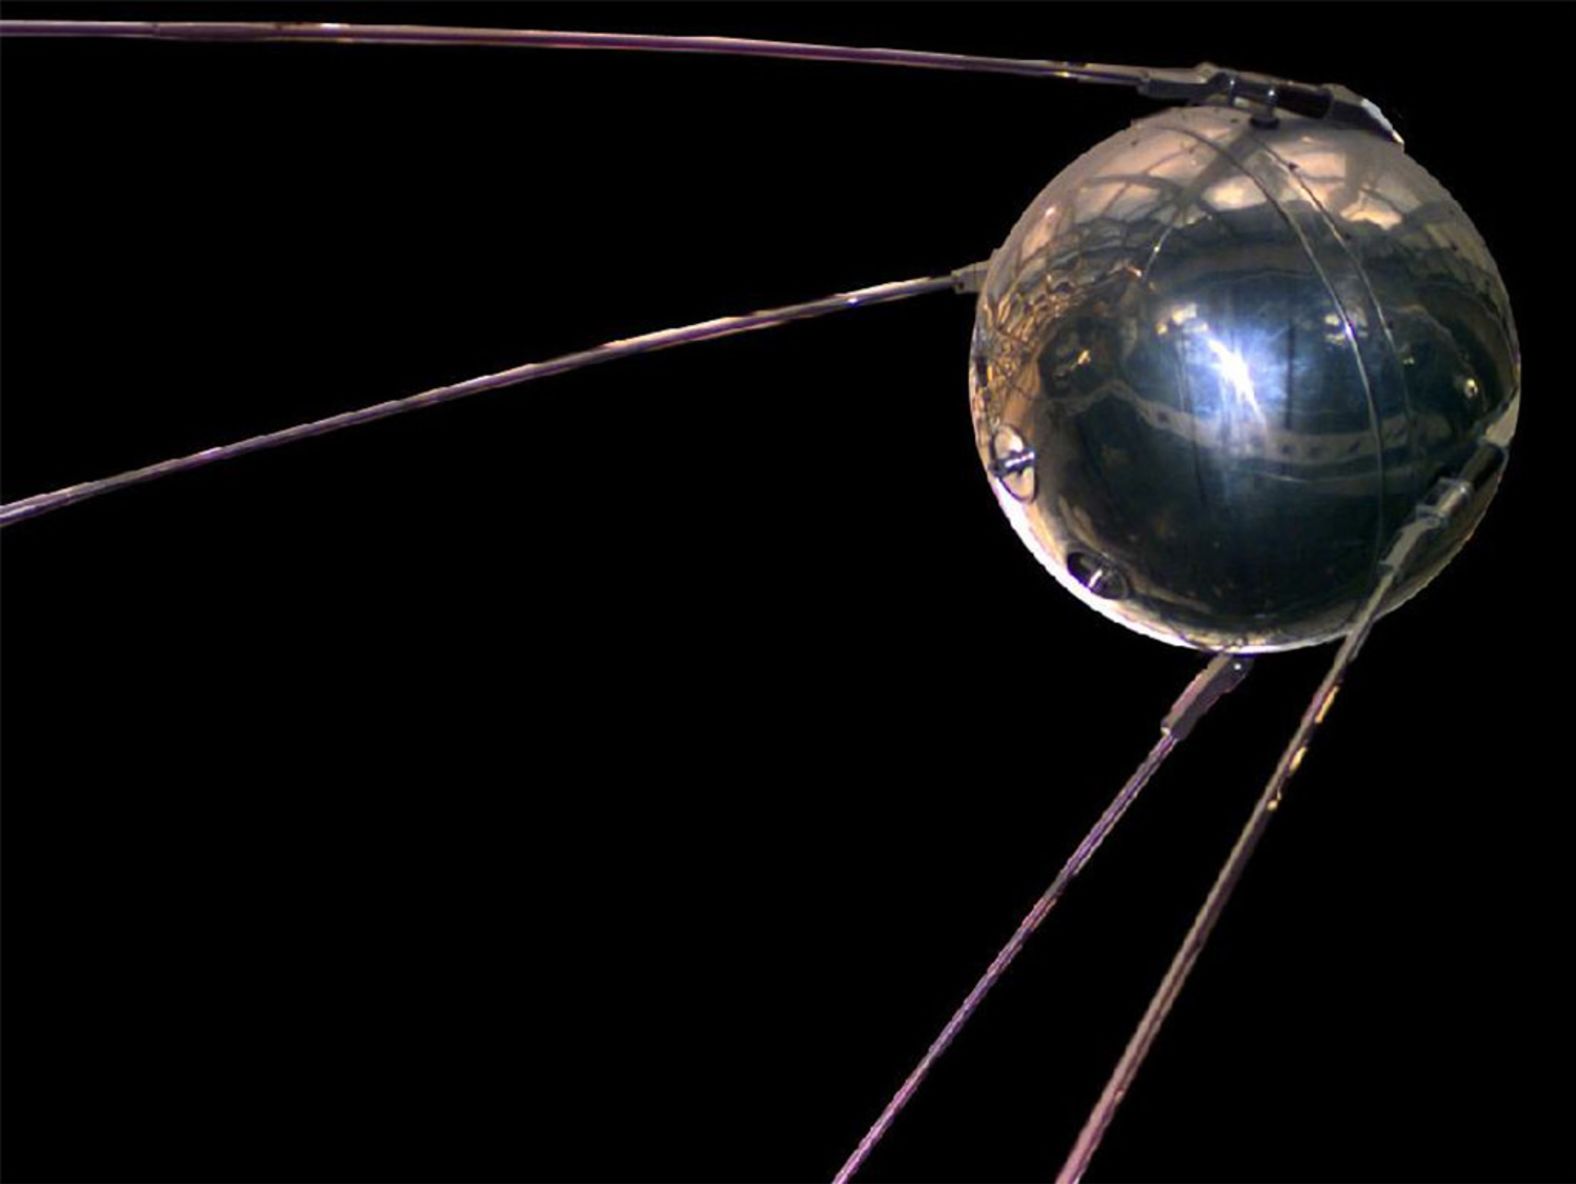 Sputnik I, the world's first satellite, was launched by the Soviet Union on October 4, 1957. It orbited the Earth every 98 minutes.